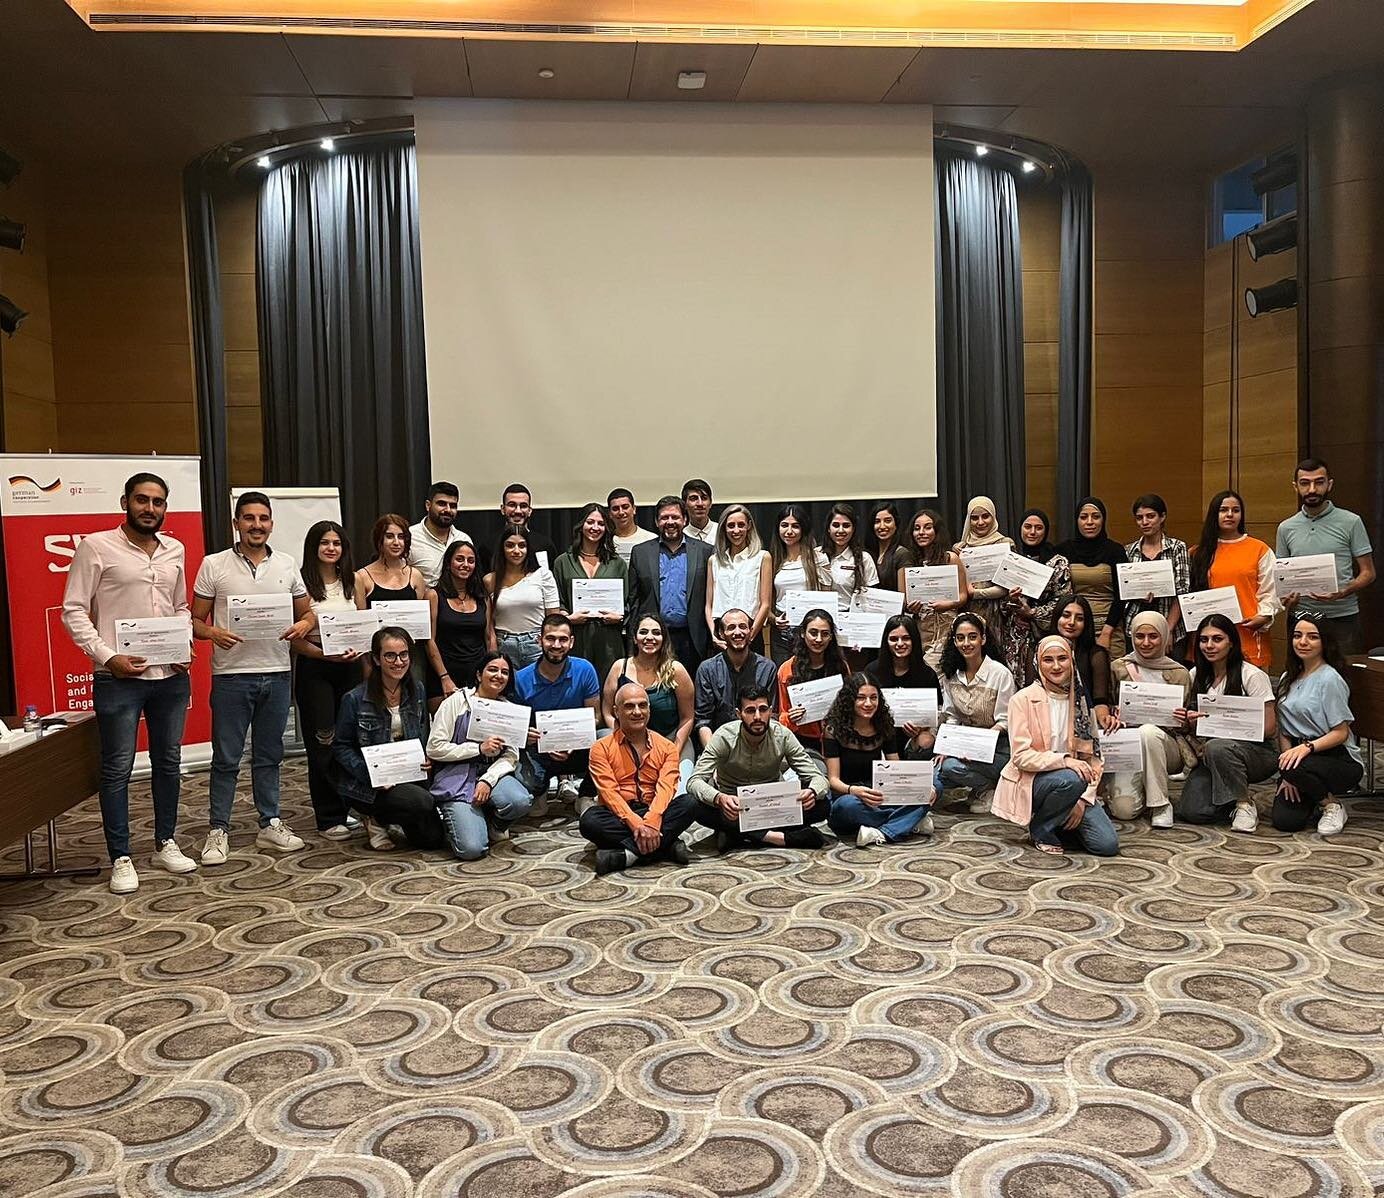 Members of LSR proudly participated in a Video Creation workshop co-organized by GIZ and BMZ in the context of their &quot;Social Participation and Community Engagement by Youth&quot; initiative.

This initiative is closely linked to our identity and